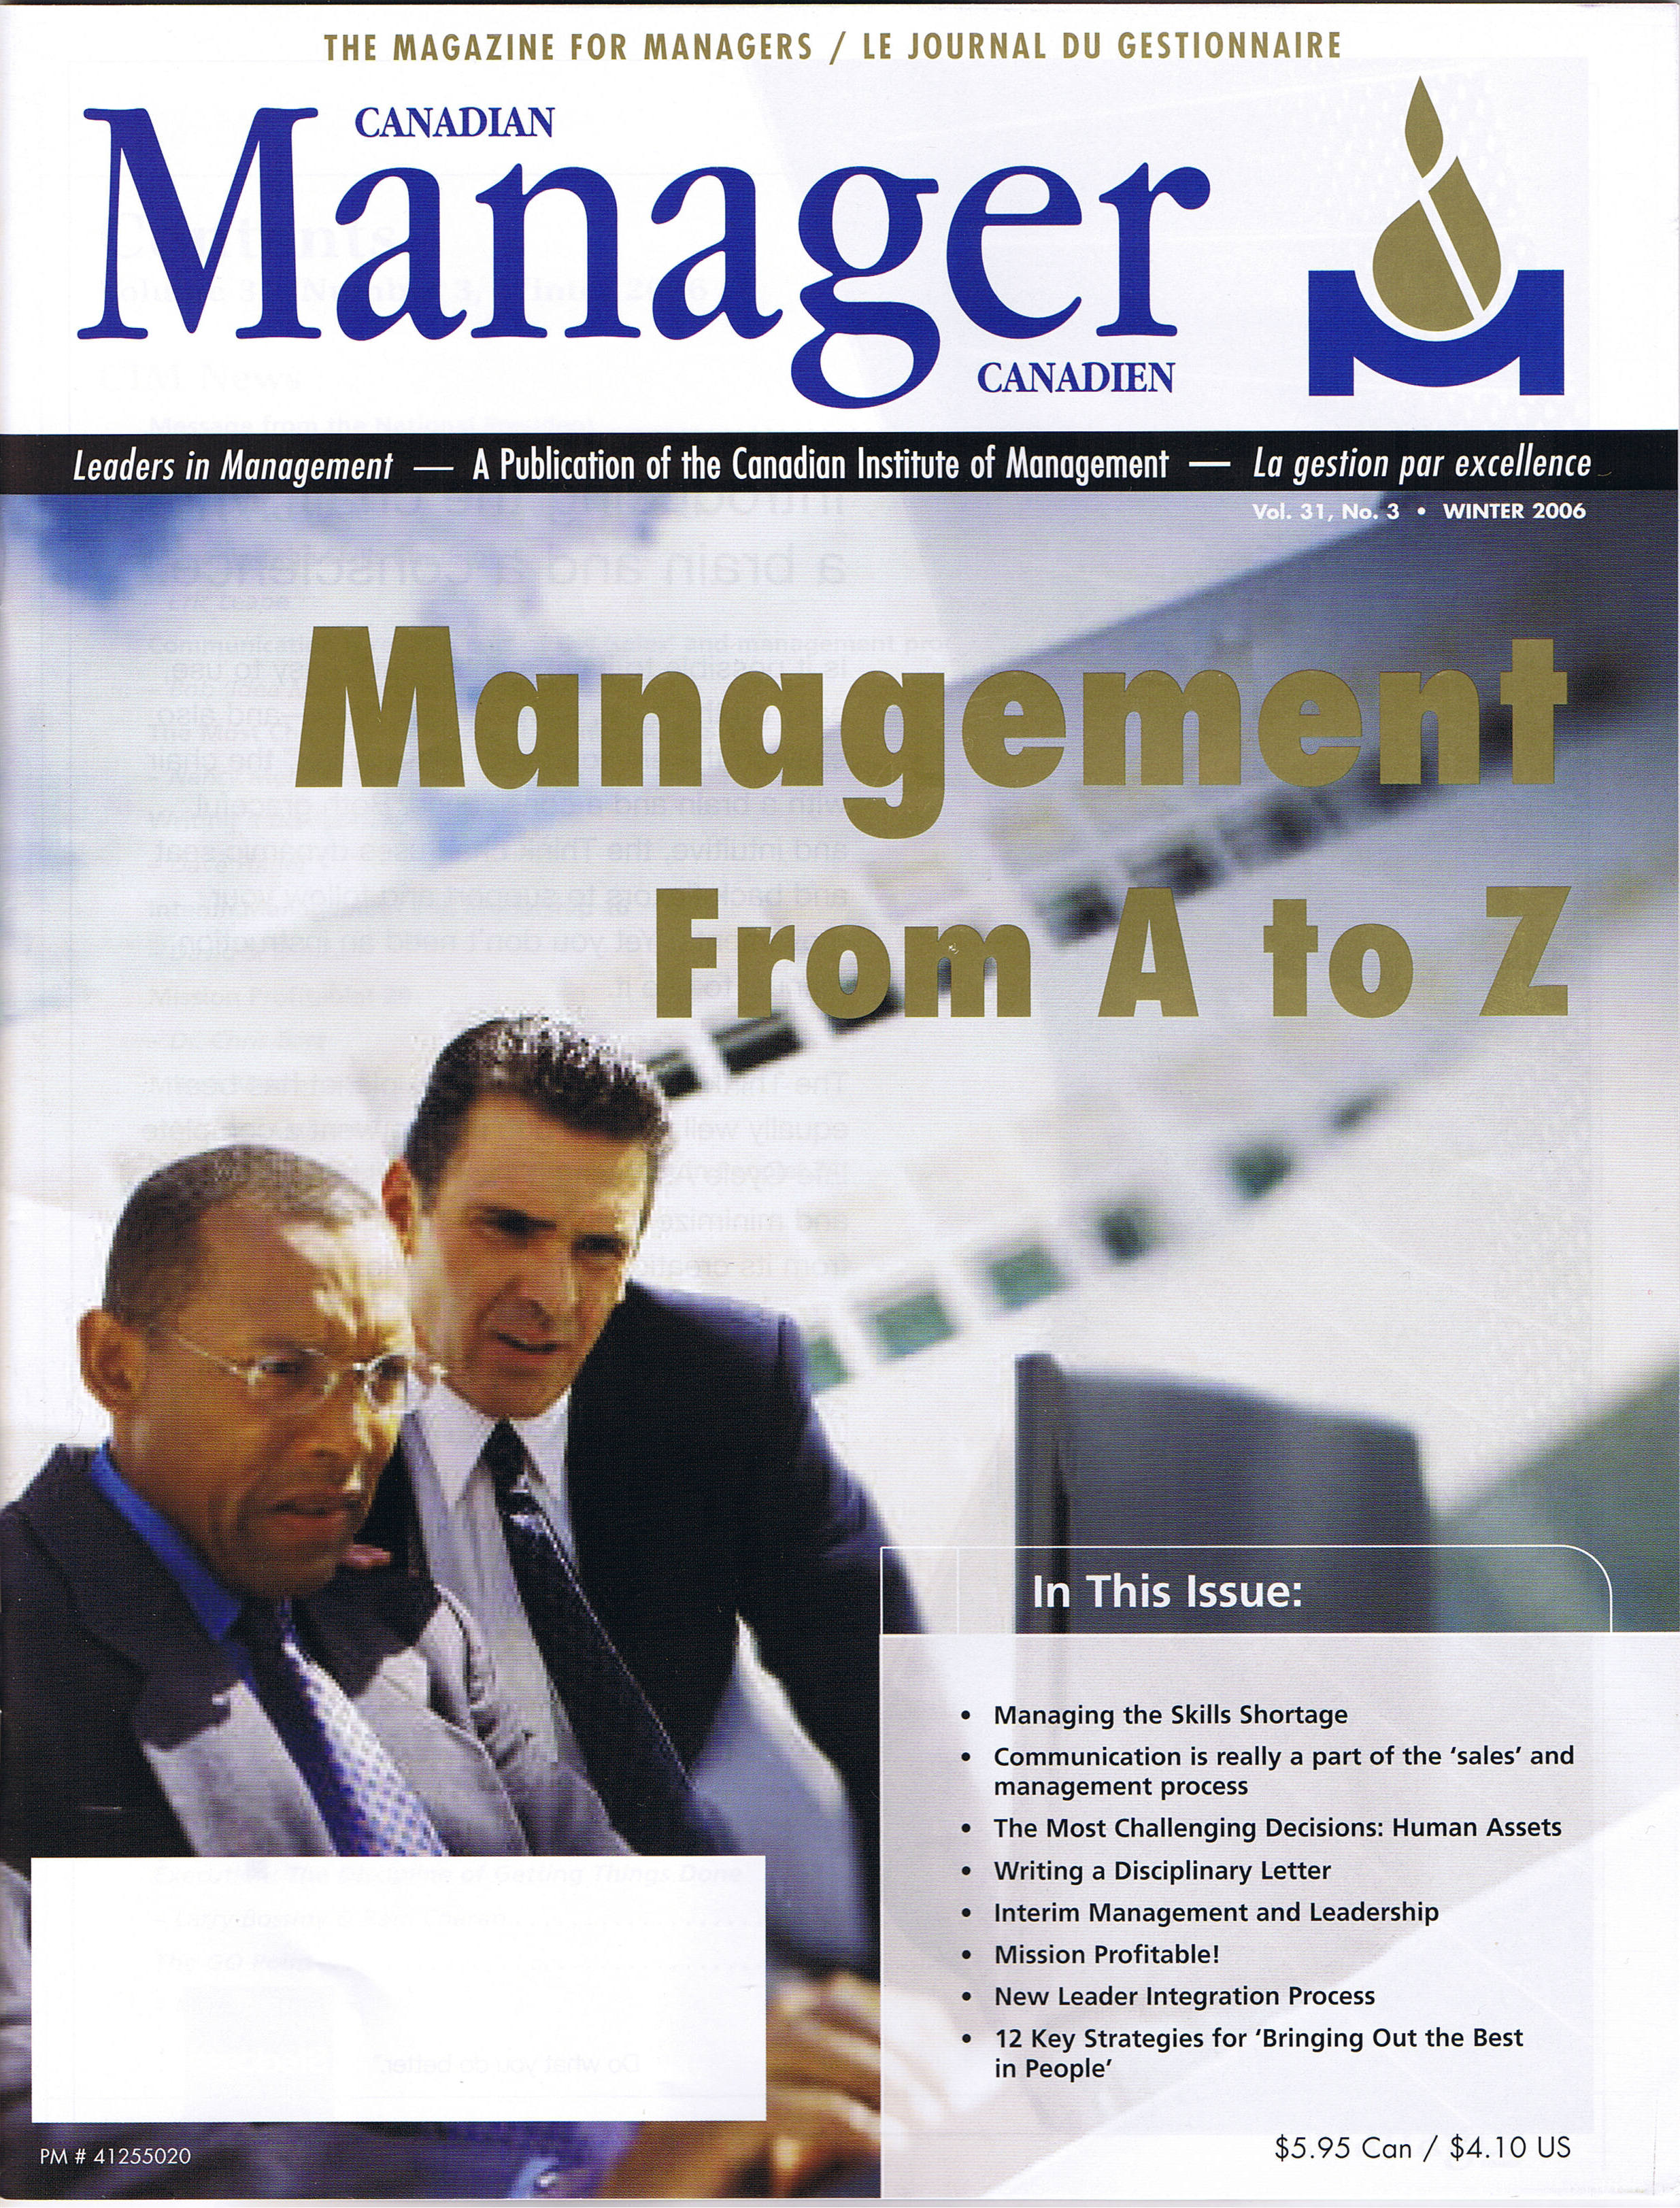 Canadian Manager Magzine is published quartlerly by the Canadian Institute of Management. This issue featured two articles by Canadian business leadership expert Bob 'Idea Man' Hooey